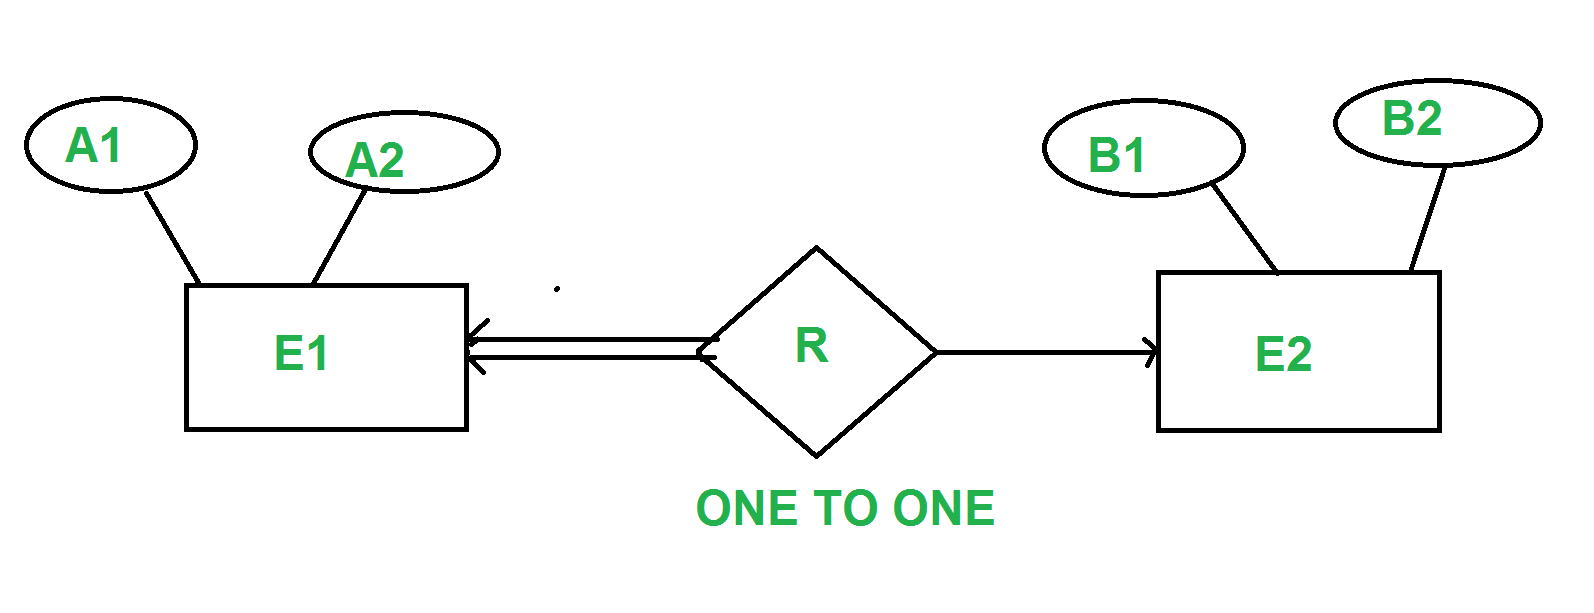 Minimization Of Er Diagram - Geeksforgeeks pertaining to Er Diagram One To One Examples